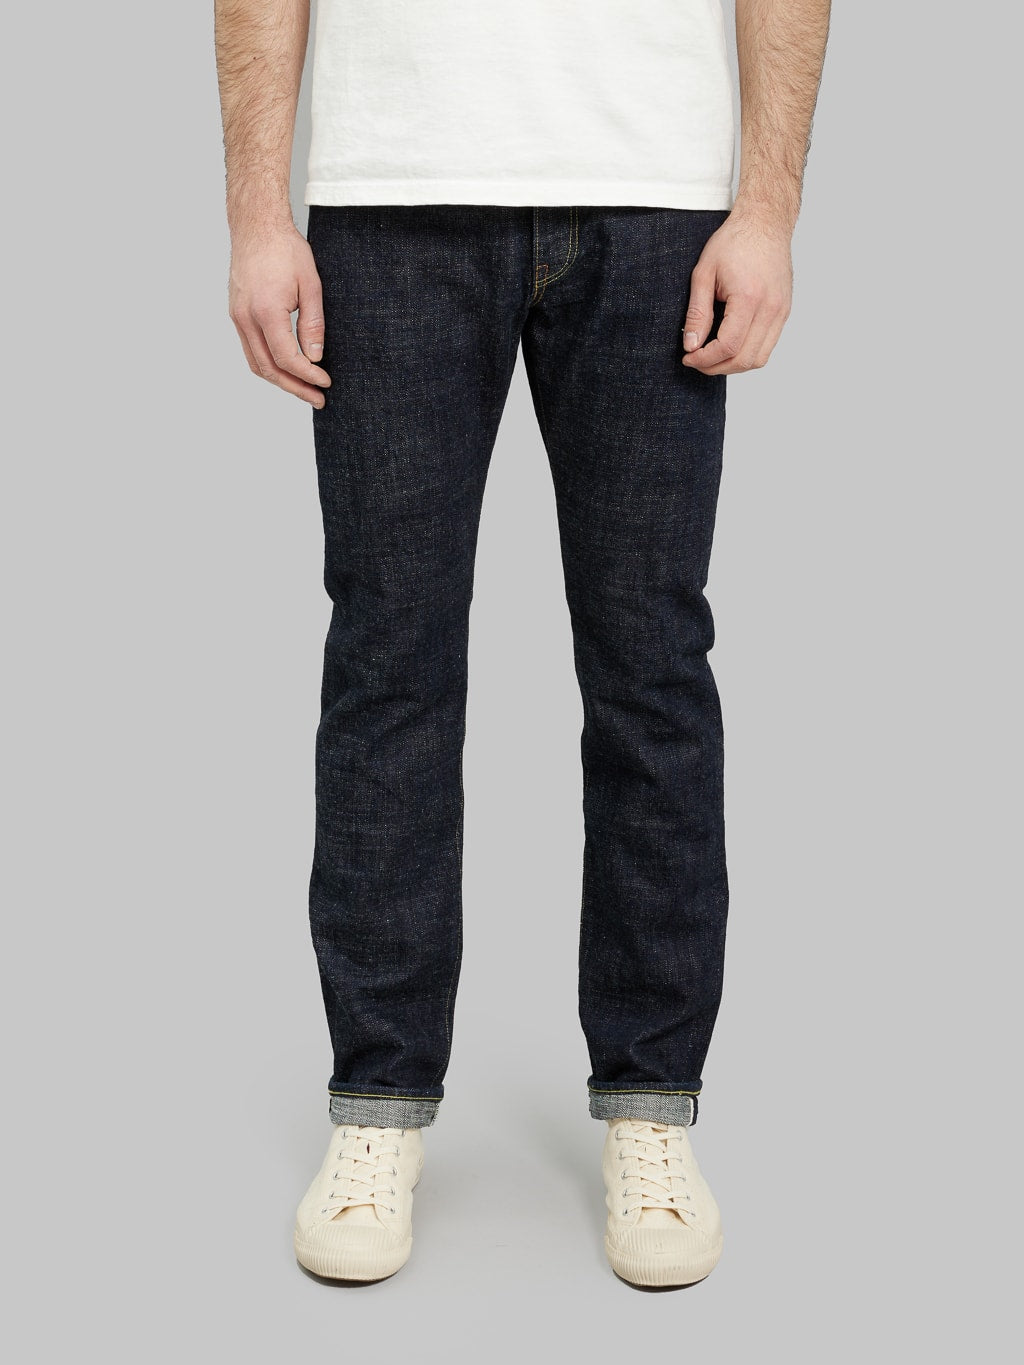 Fob factory slim straight jeans front fit